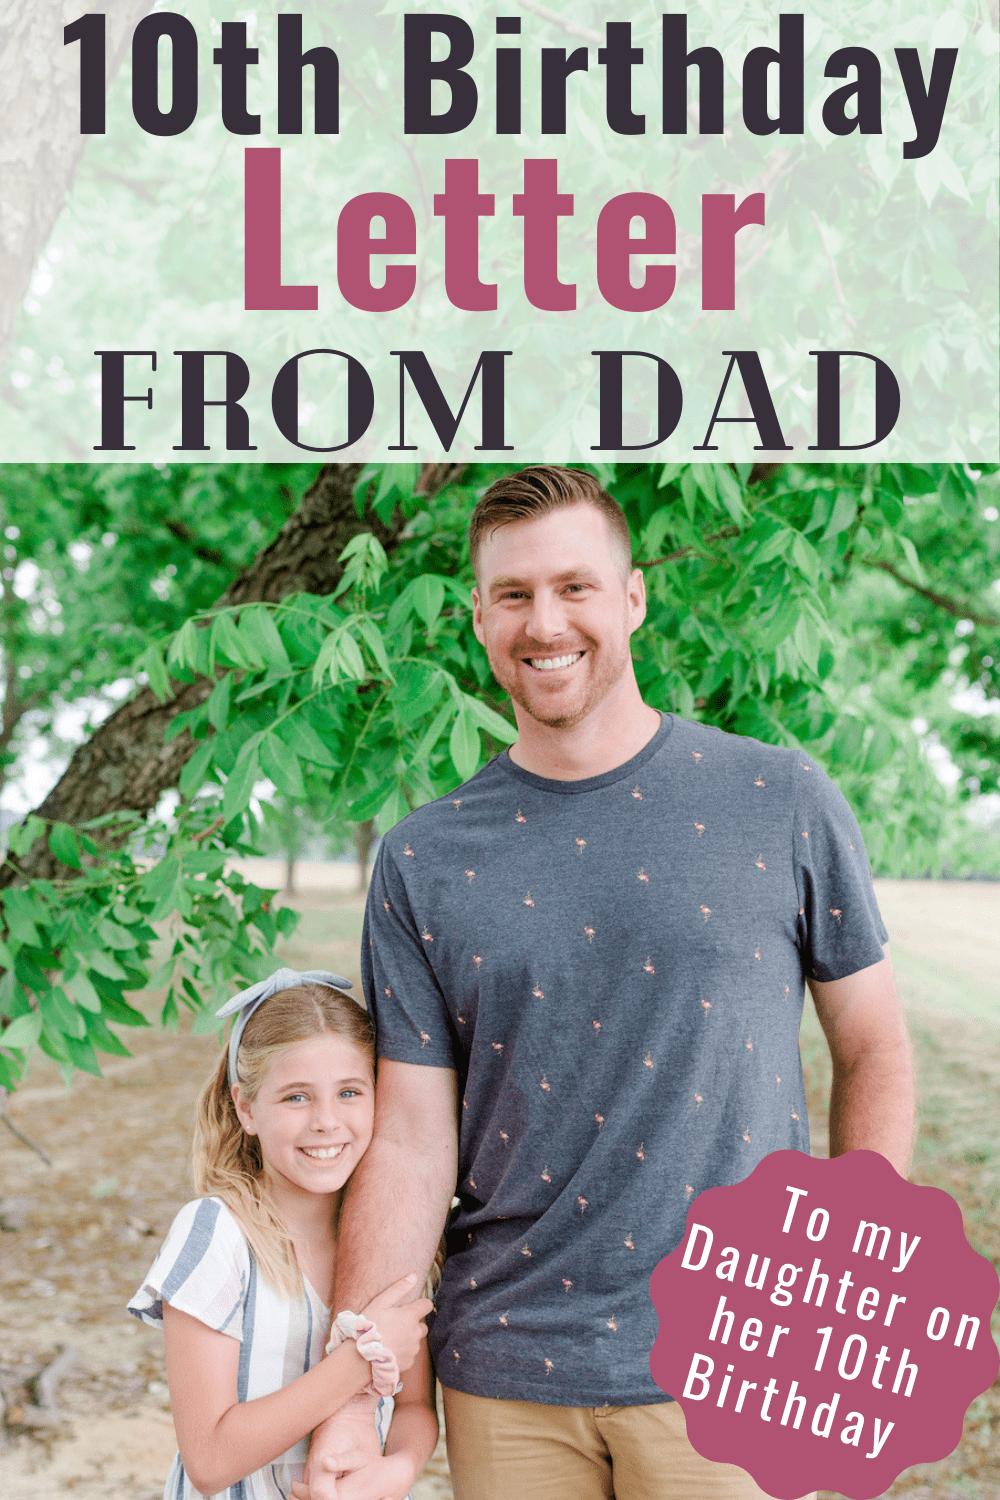 10th Birthday letter to Daughter from Dad - A letter to my 10 year old daughter on her birthday from her father. A simple, meaningful birthday tradition for kids. 